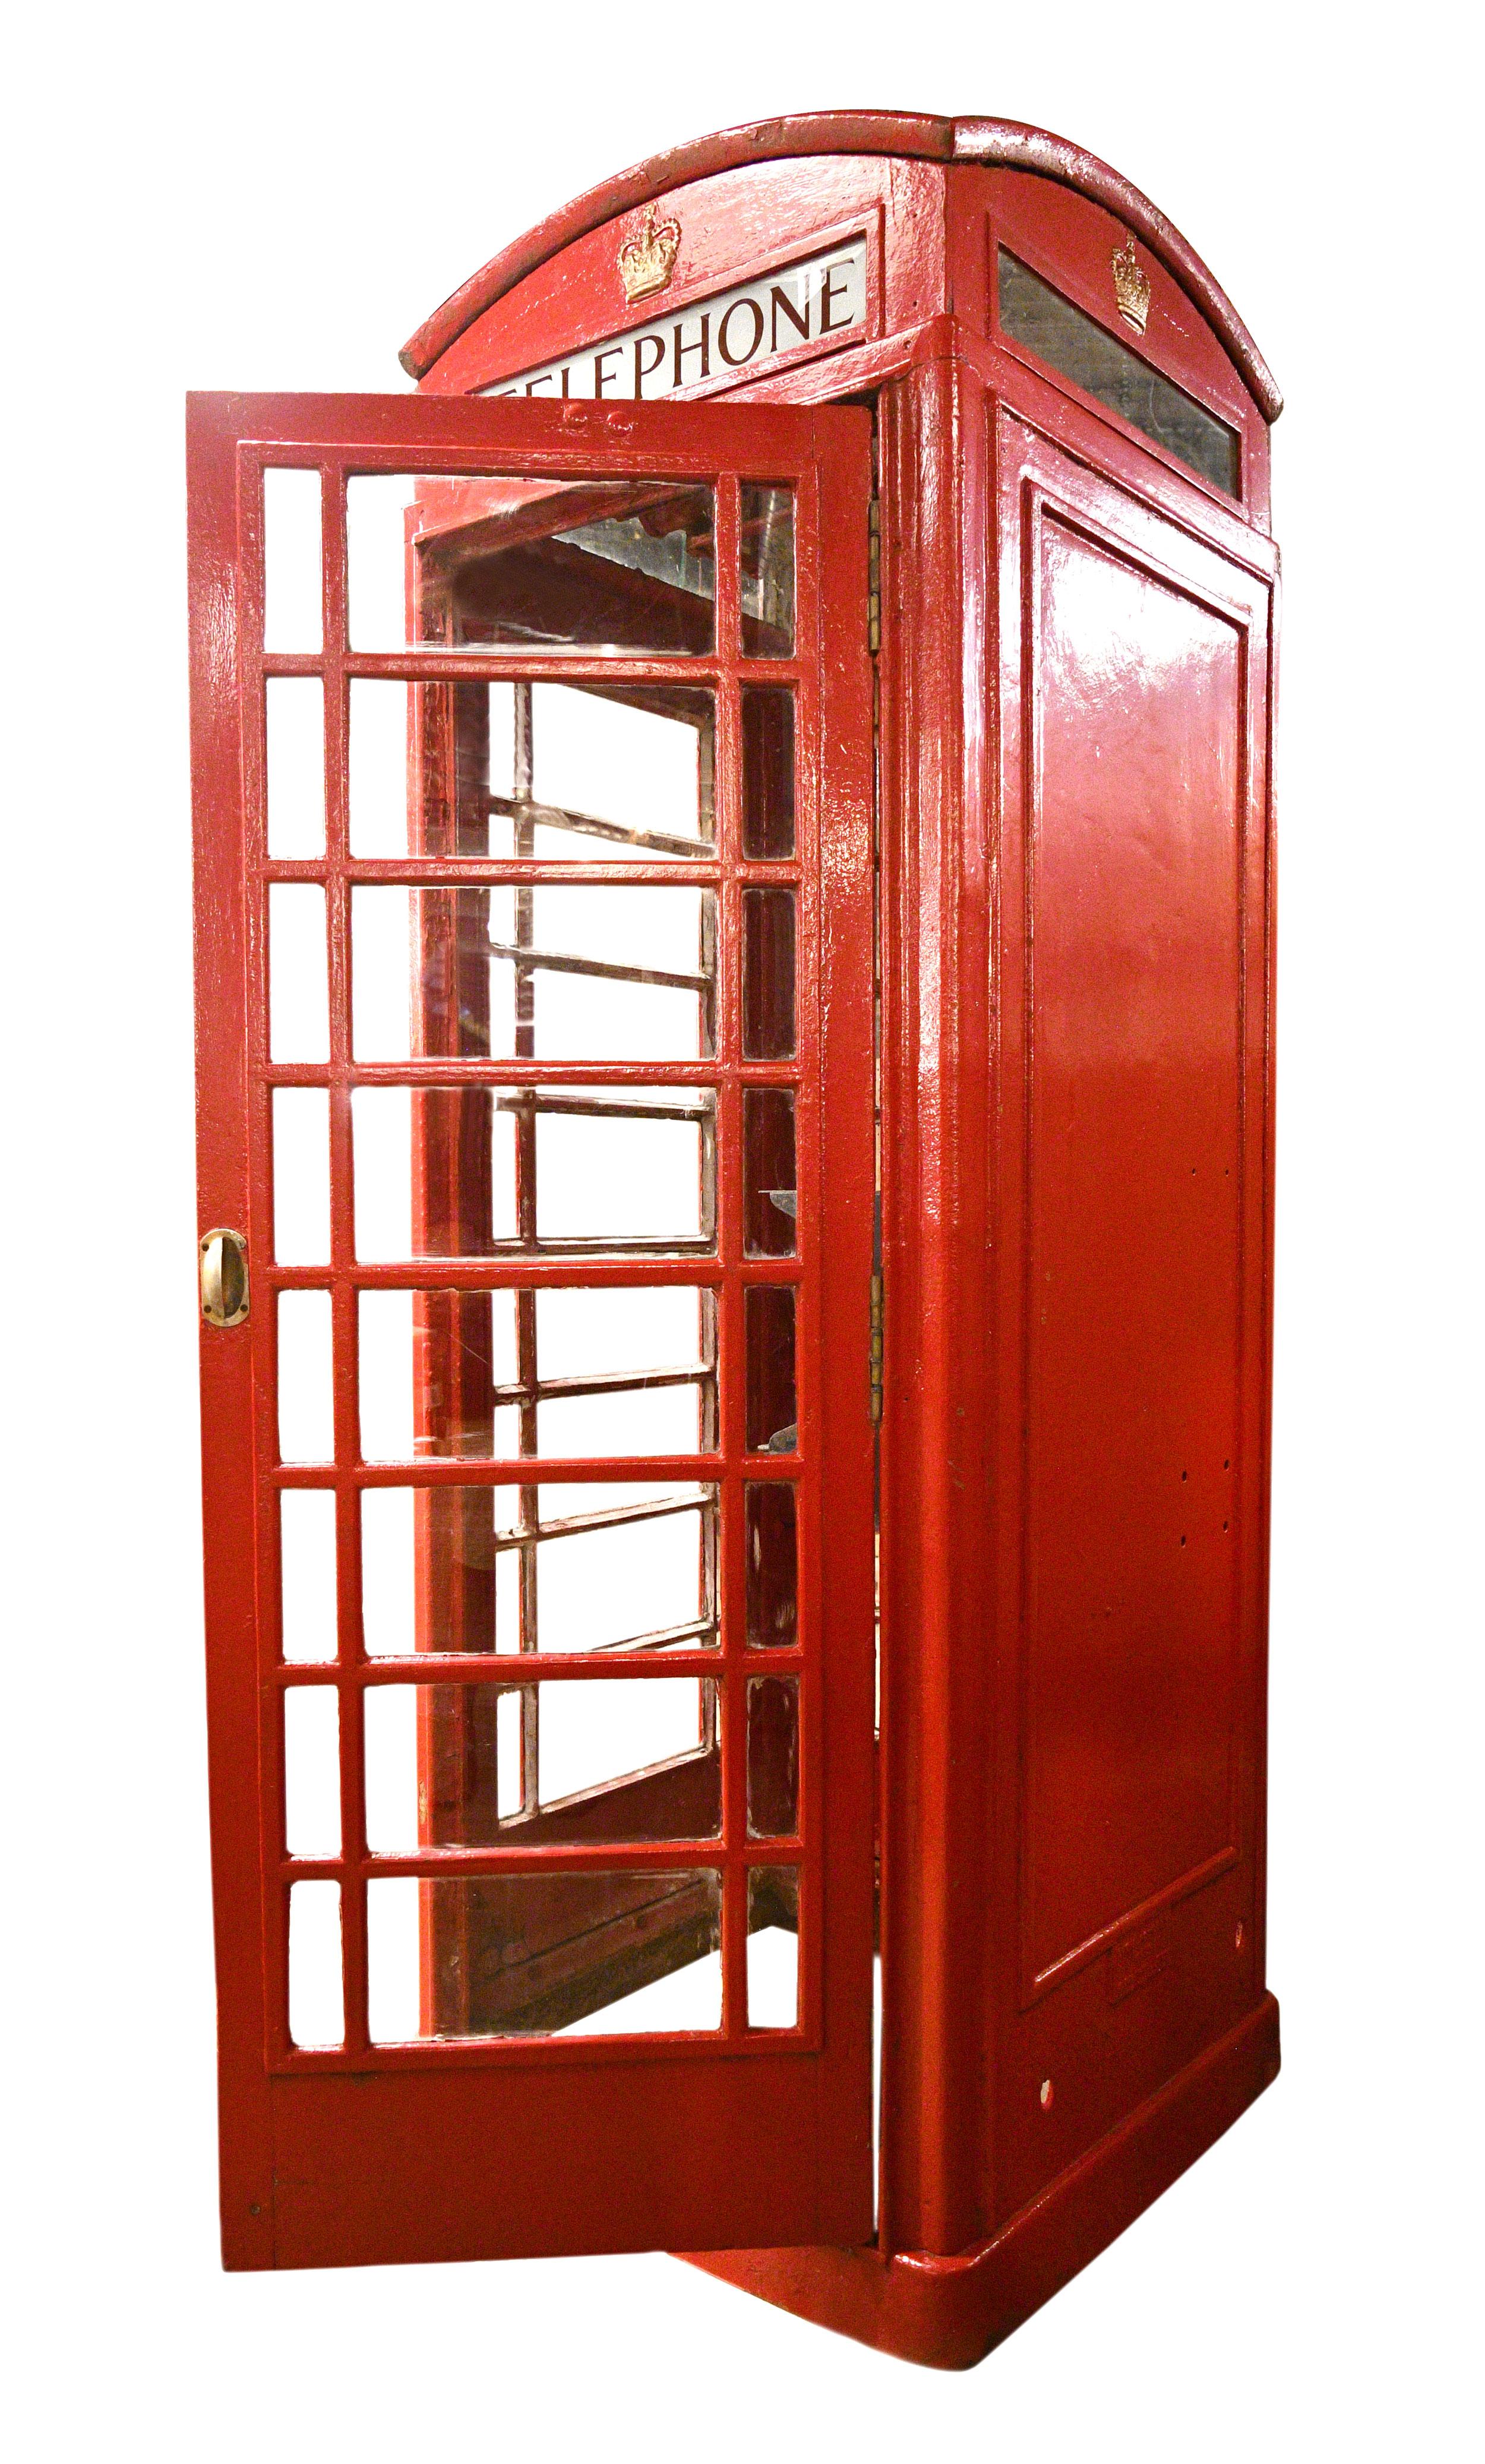 This authentic red K6 telephone booth is made of sturdy cast iron and was once in operation overseas in Middlesbrough, England. The red telephone box, a telephone kiosk for a public telephone designed by Sir Giles Gilbert Scott, was a familiar sight